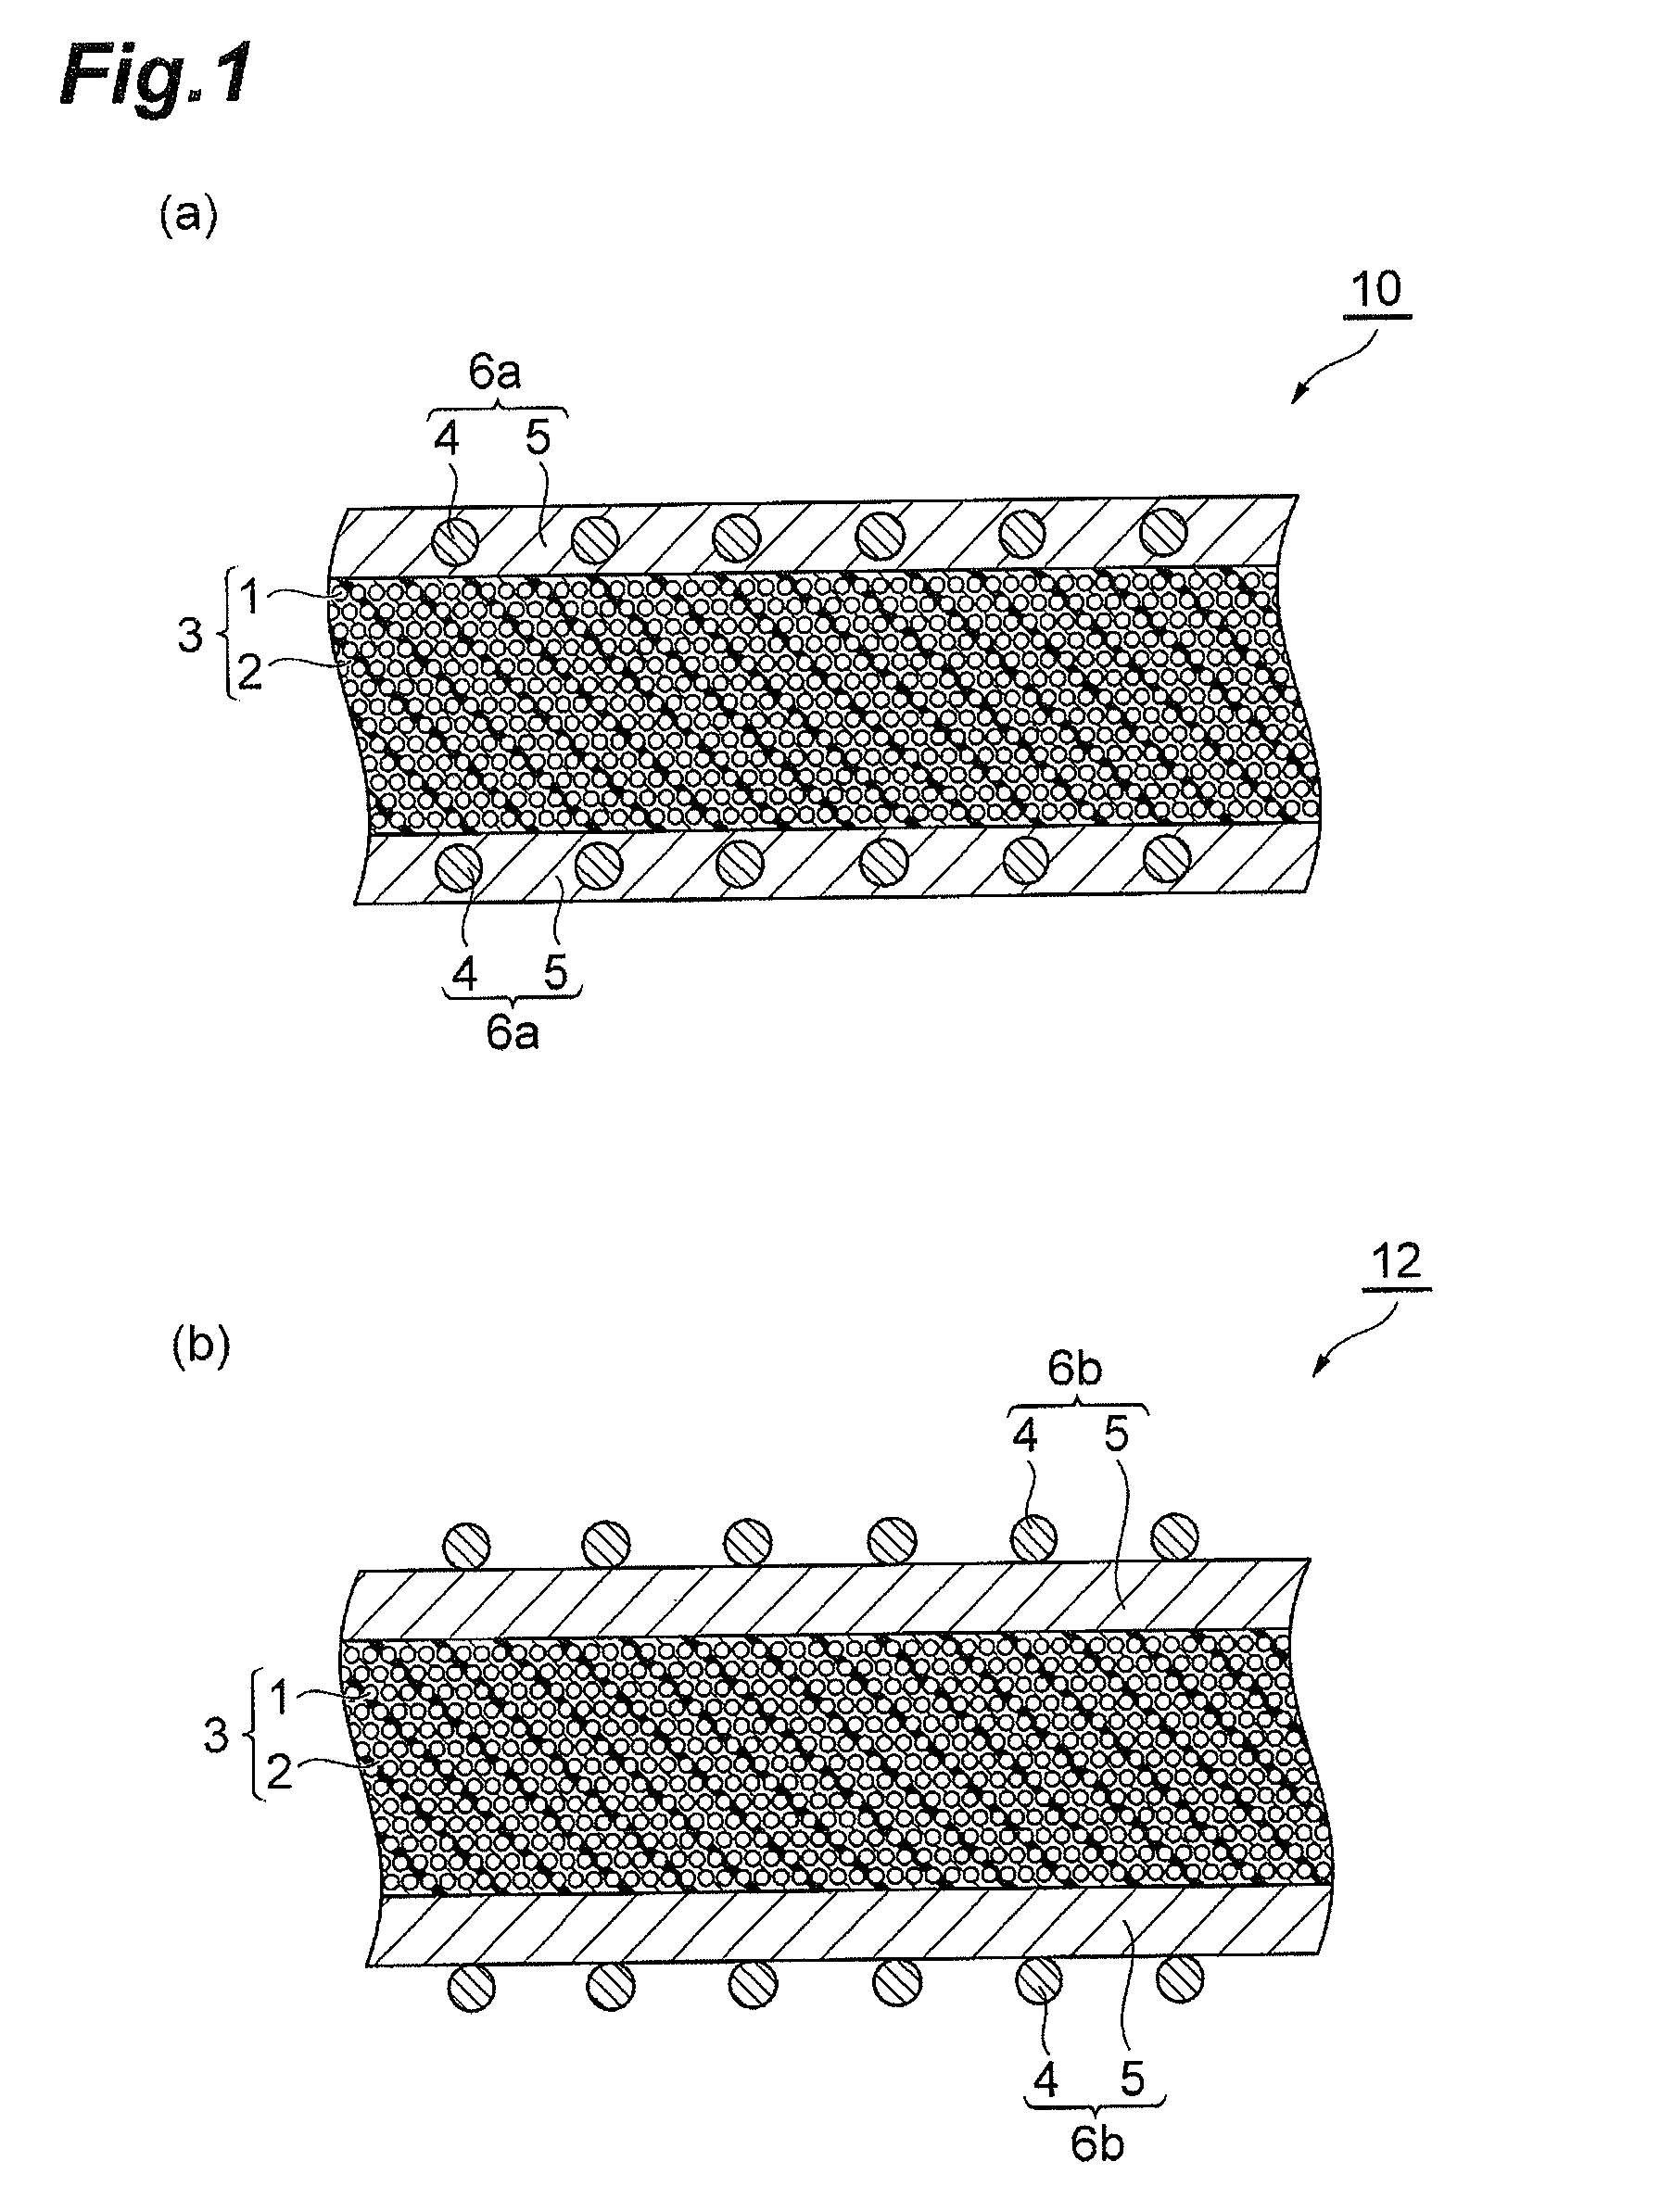 Prepreg, fiber-reinforced composite material, and resin composition containing particles